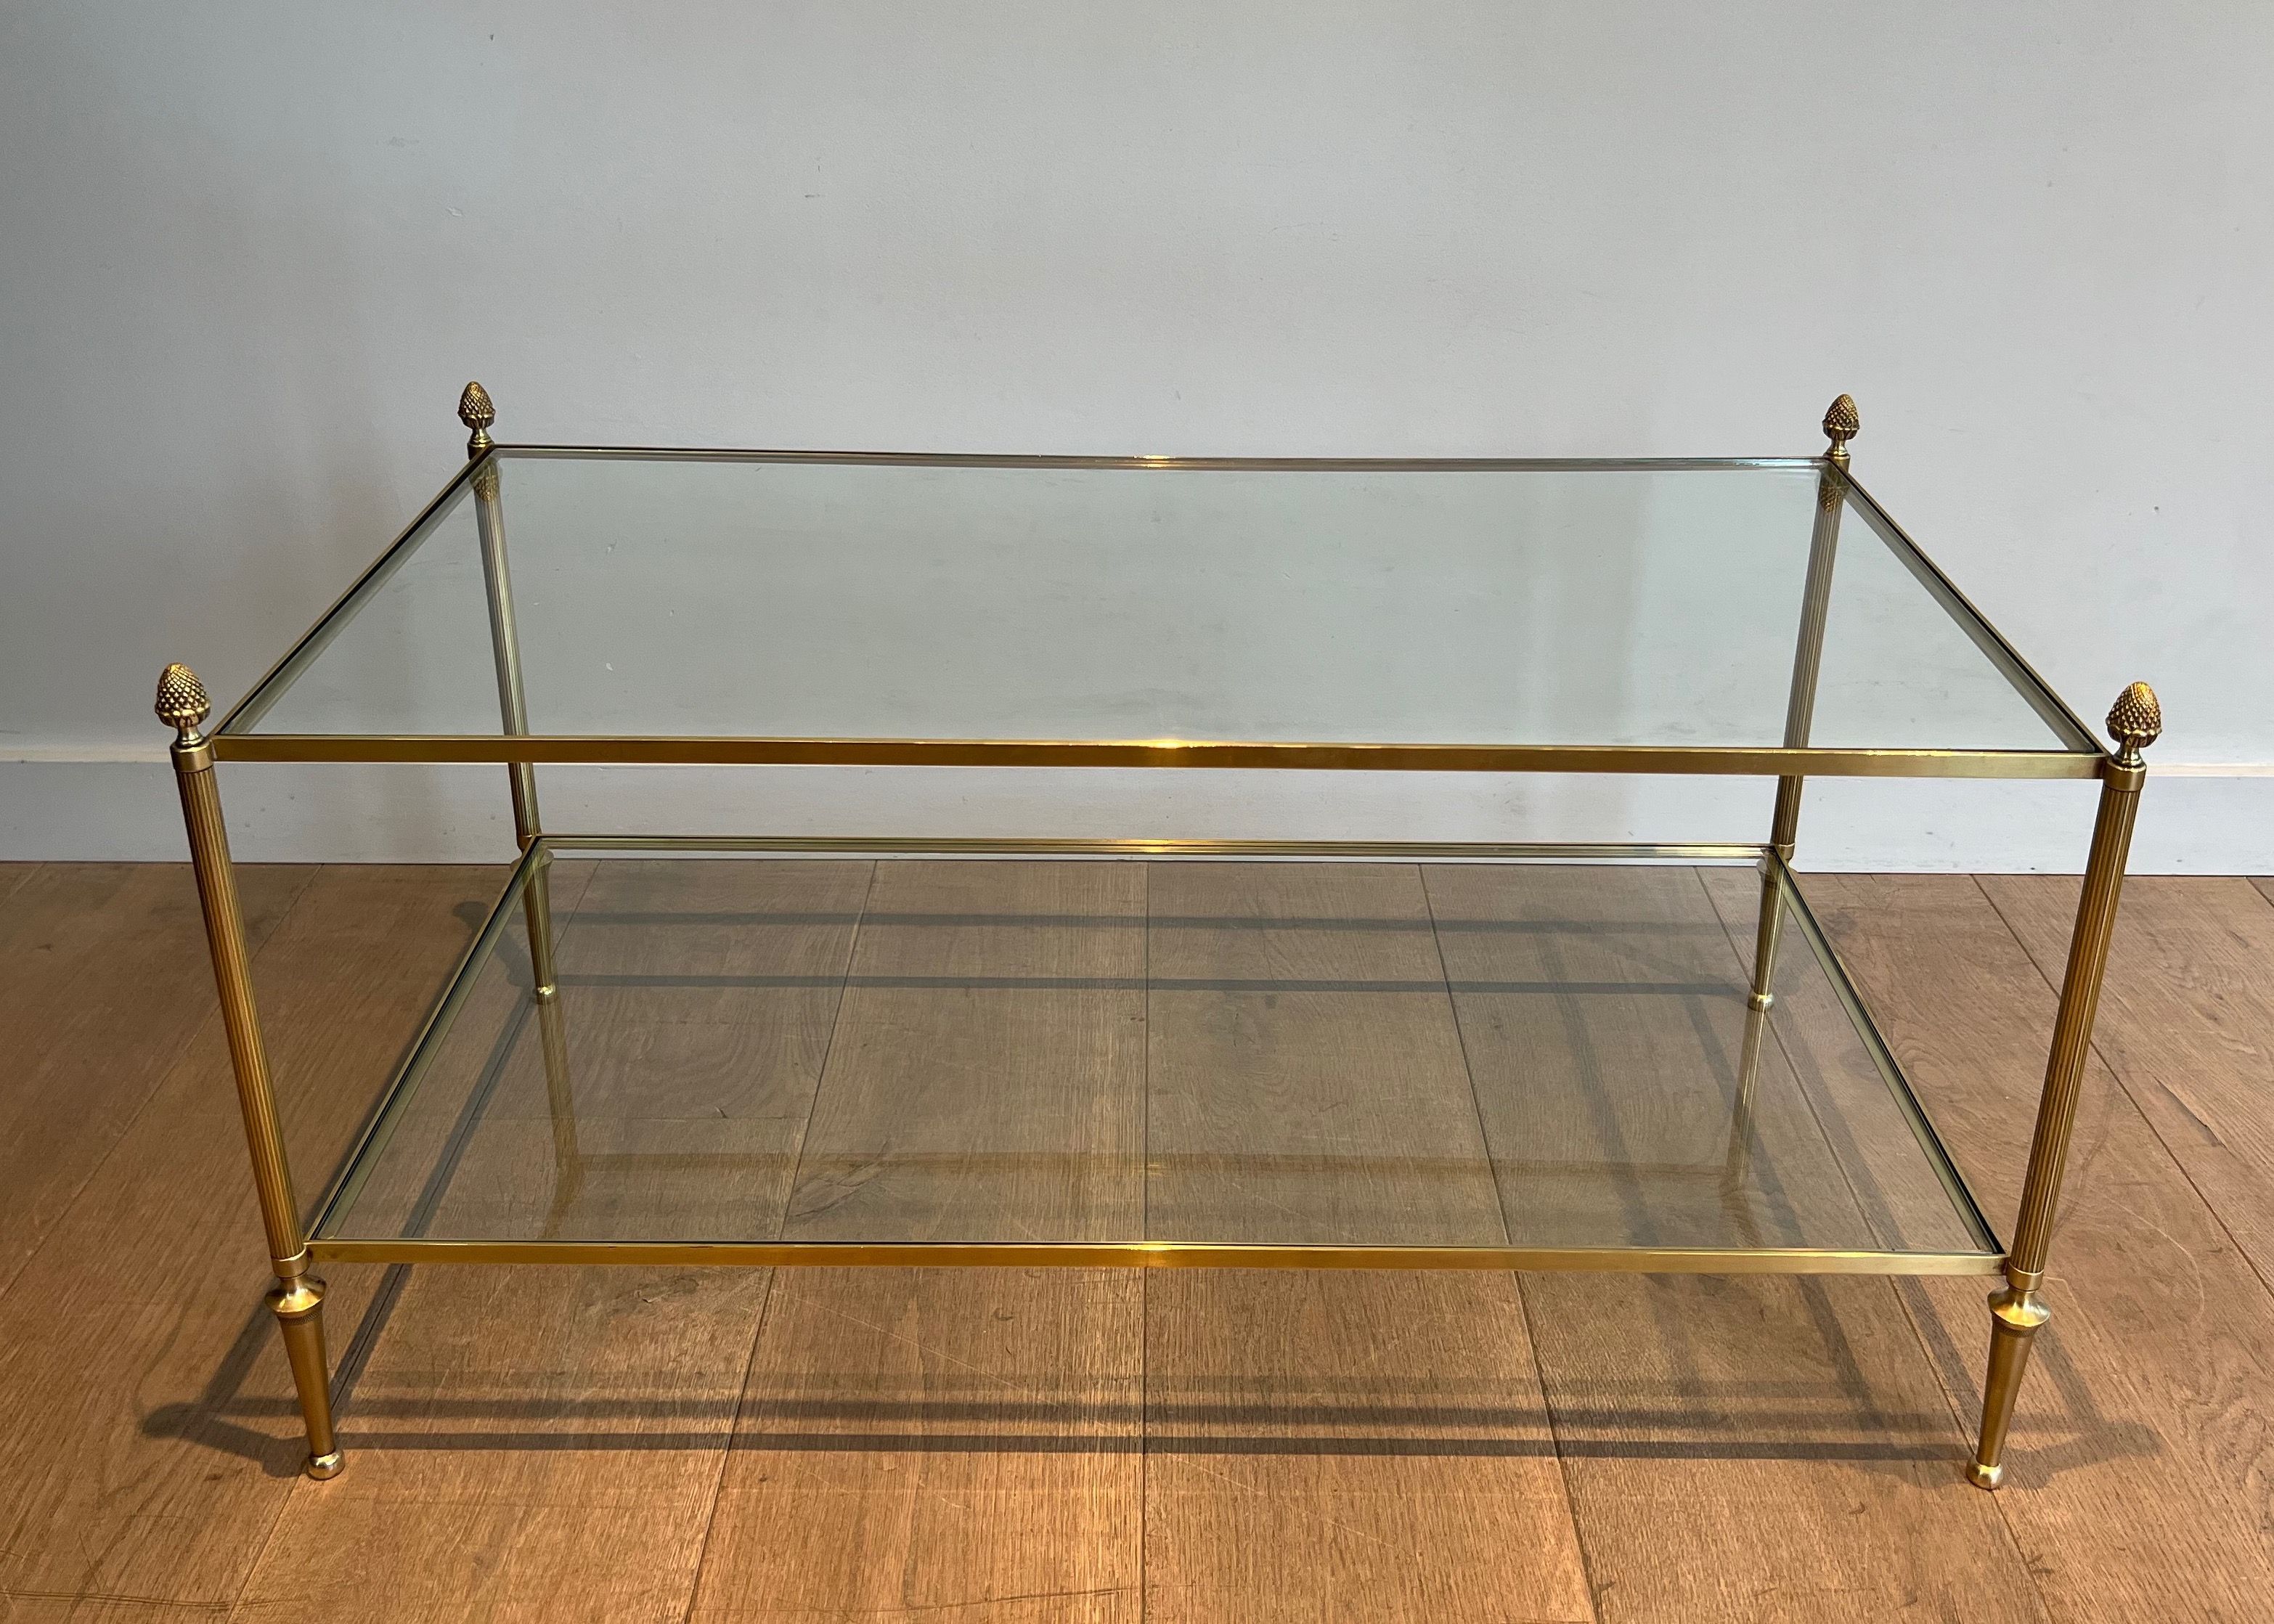 Neoclassical Style Coffee Table in Bronze, Brass with Clear Glass Shelves by Maison Baguès